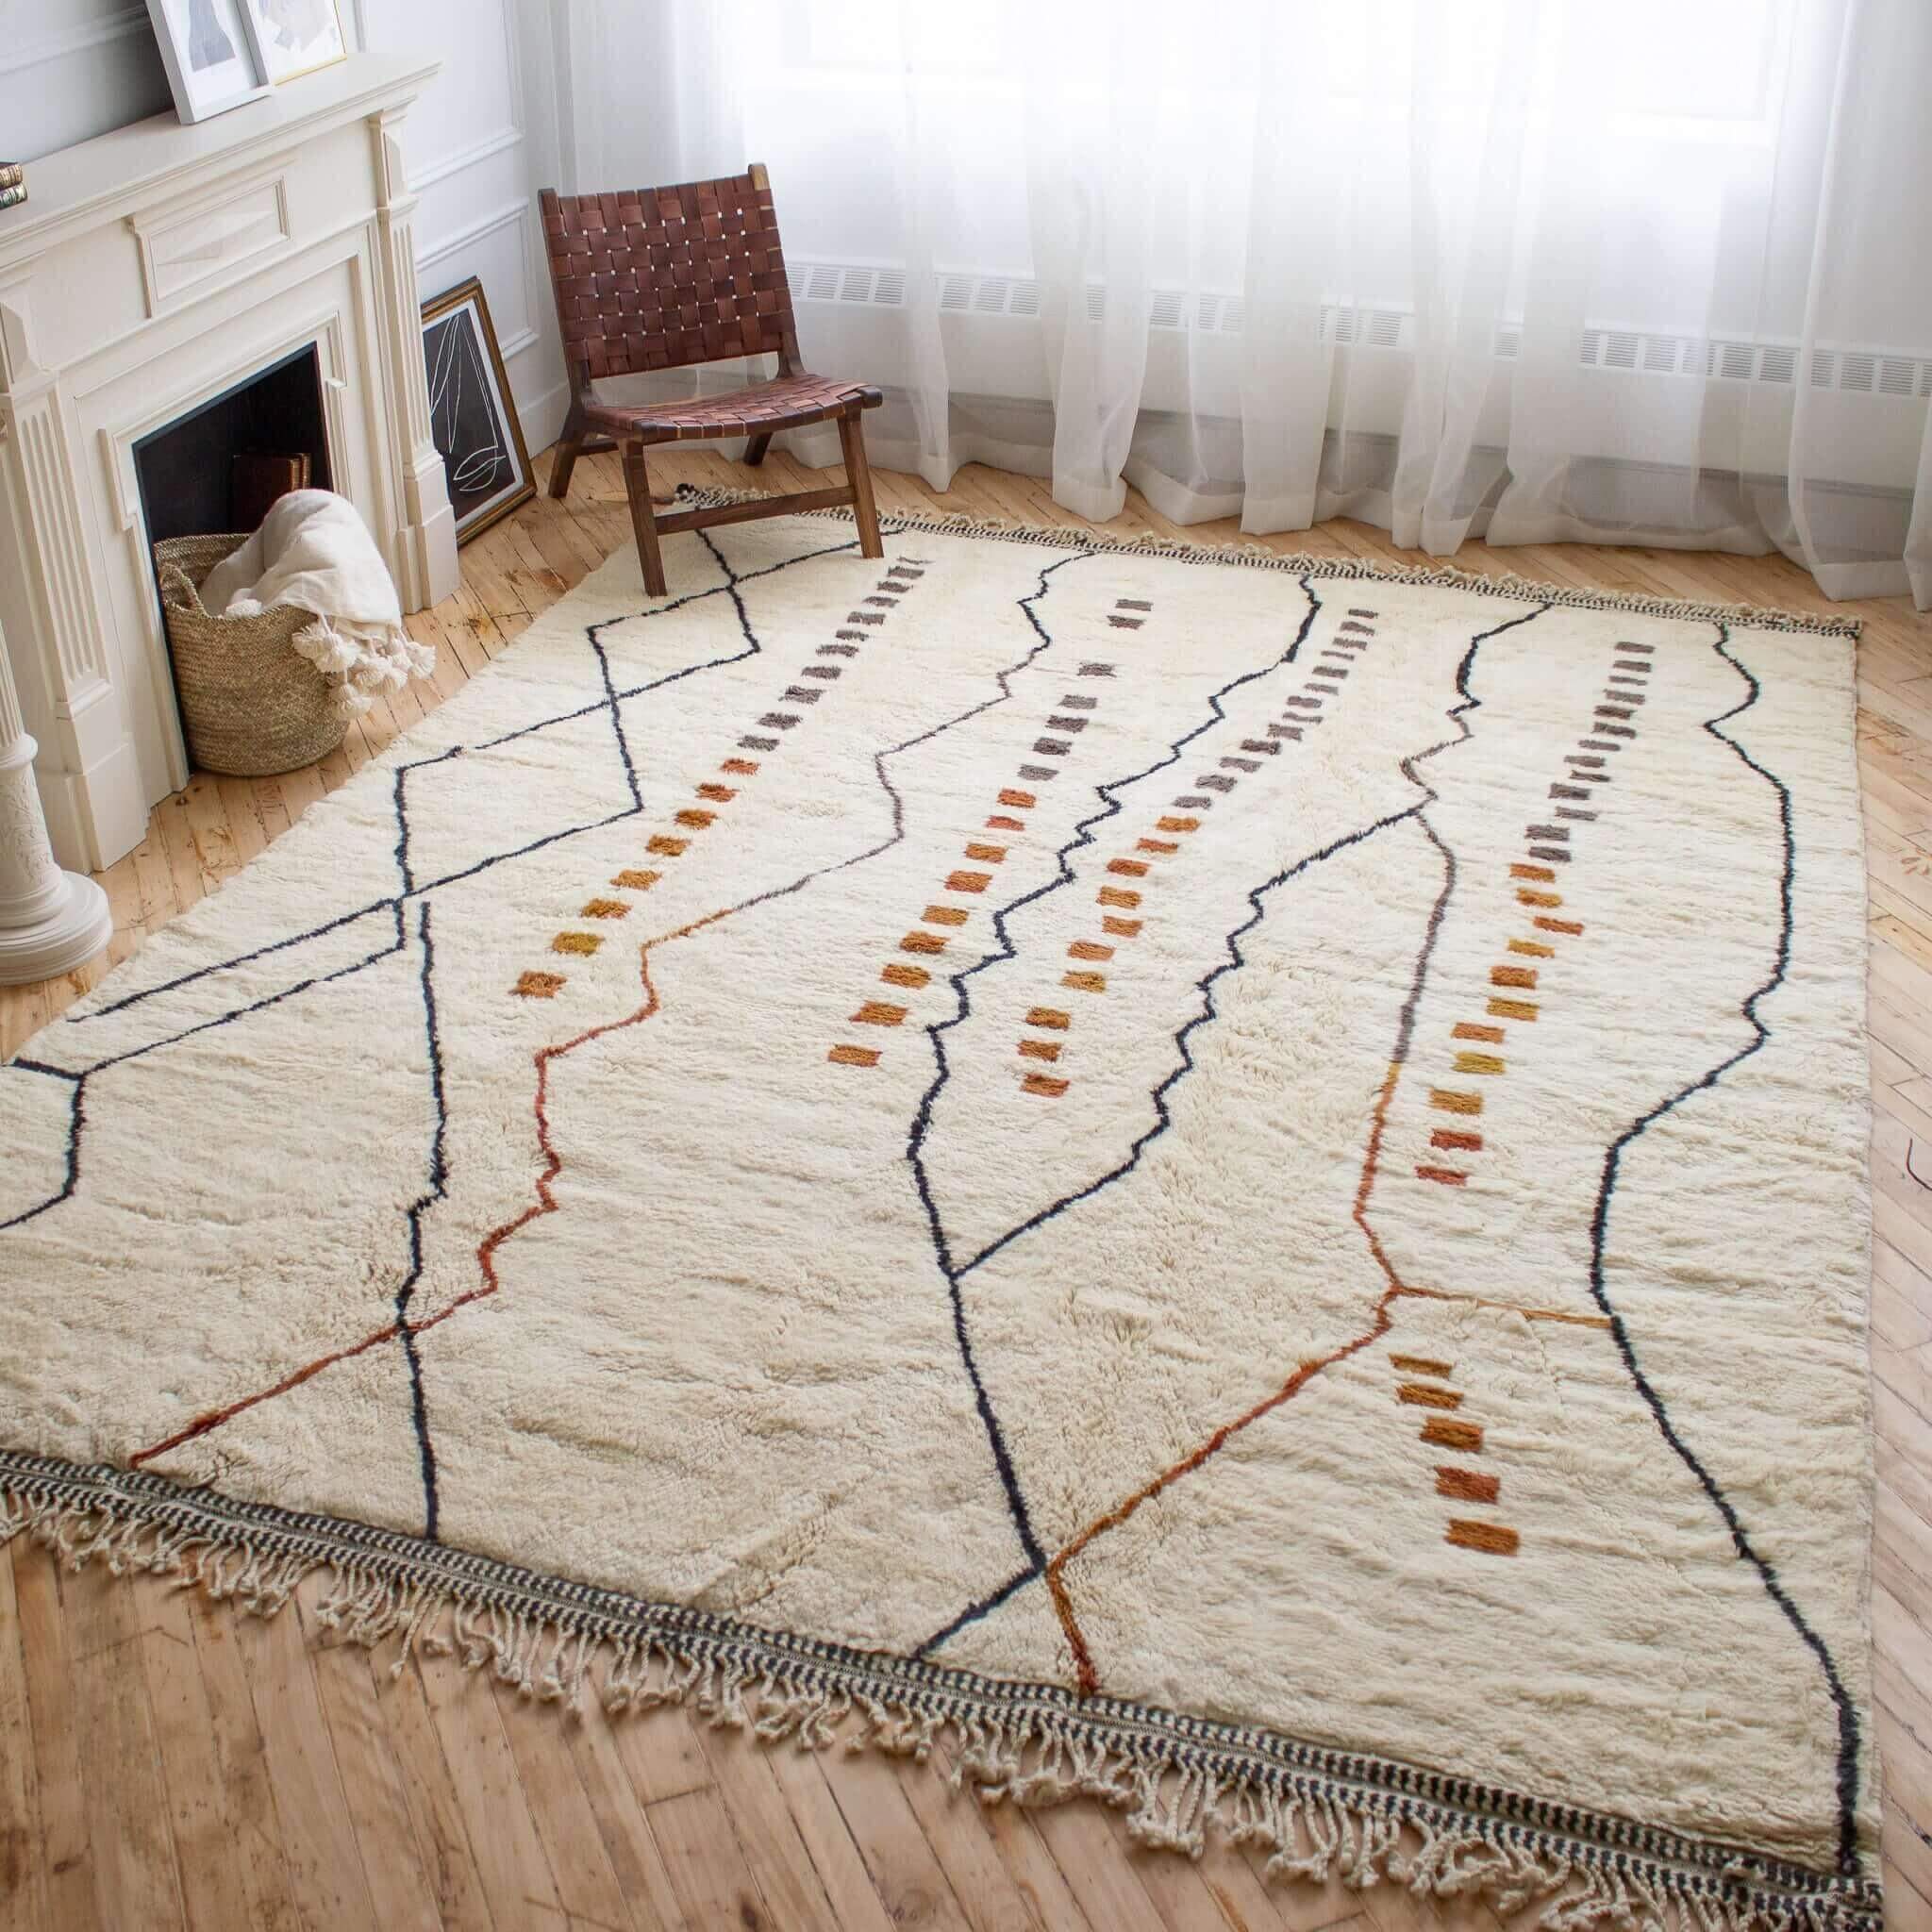 How to make a moroccan rugs ? The Art of Making a Moroccan Rugs